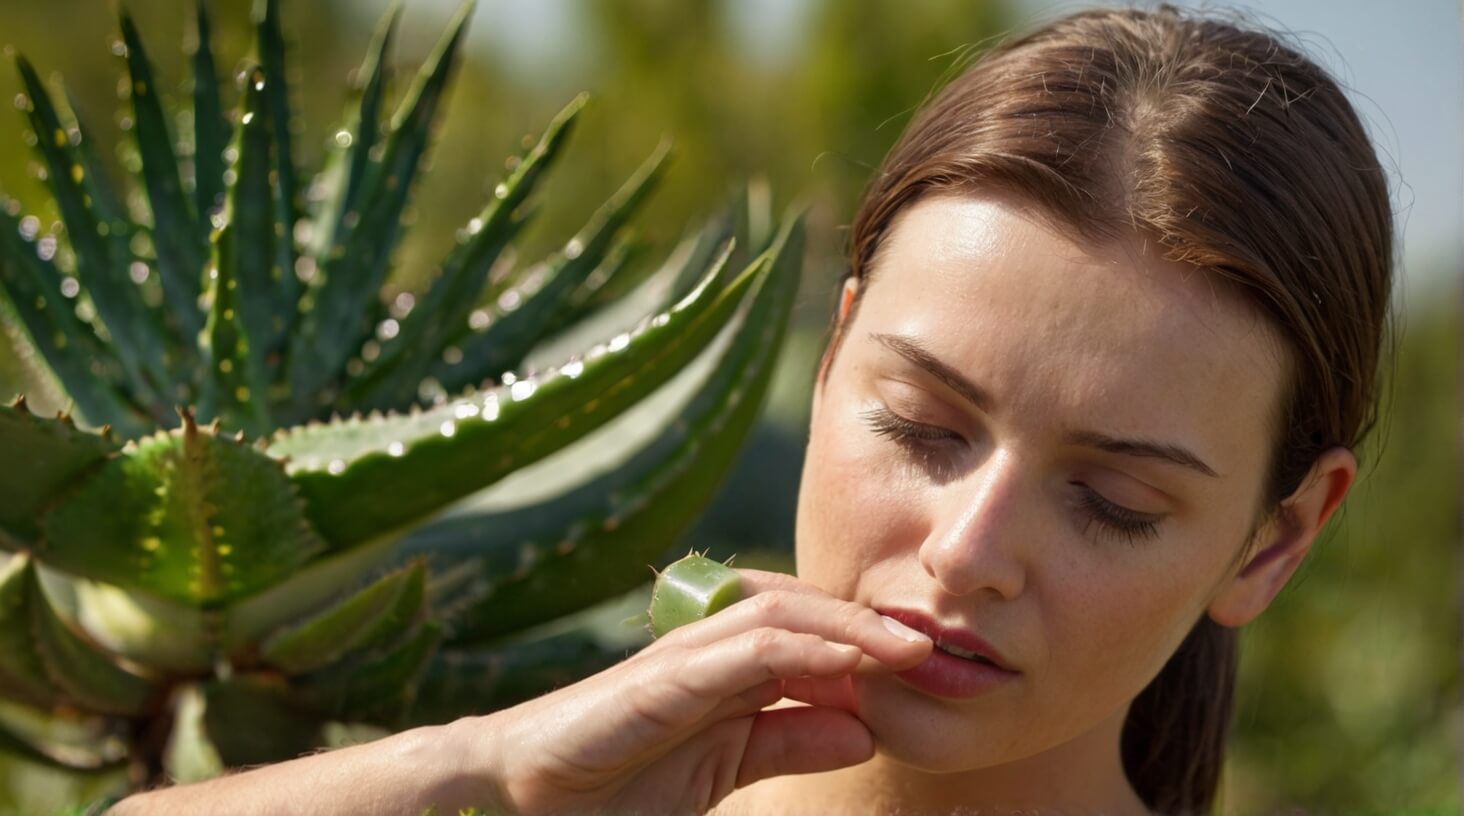 Image showing a list of potential side effects associated with Aloe Vera supplements, including digestive discomfort, allergic reactions, and interactions with medications.